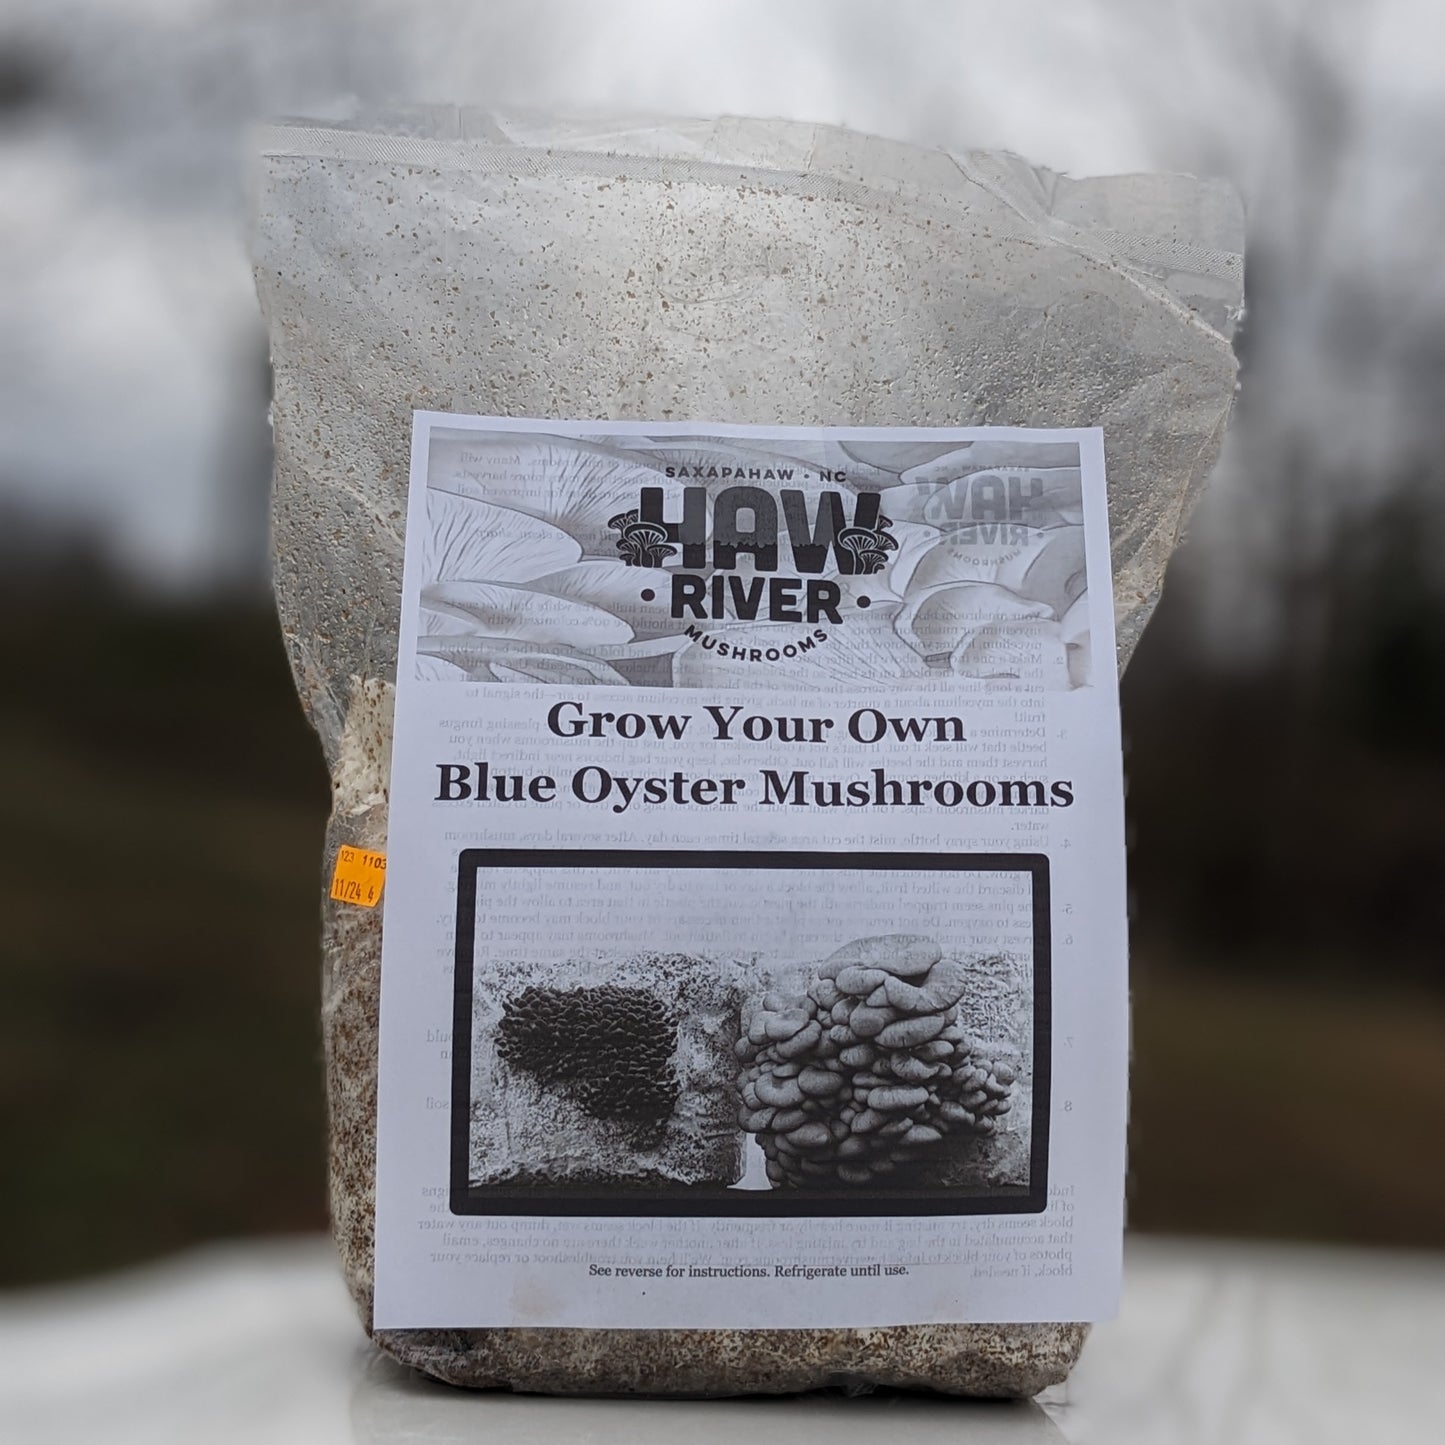 Grow Your Own Blue Oyster Mushrooms, 5lb bag